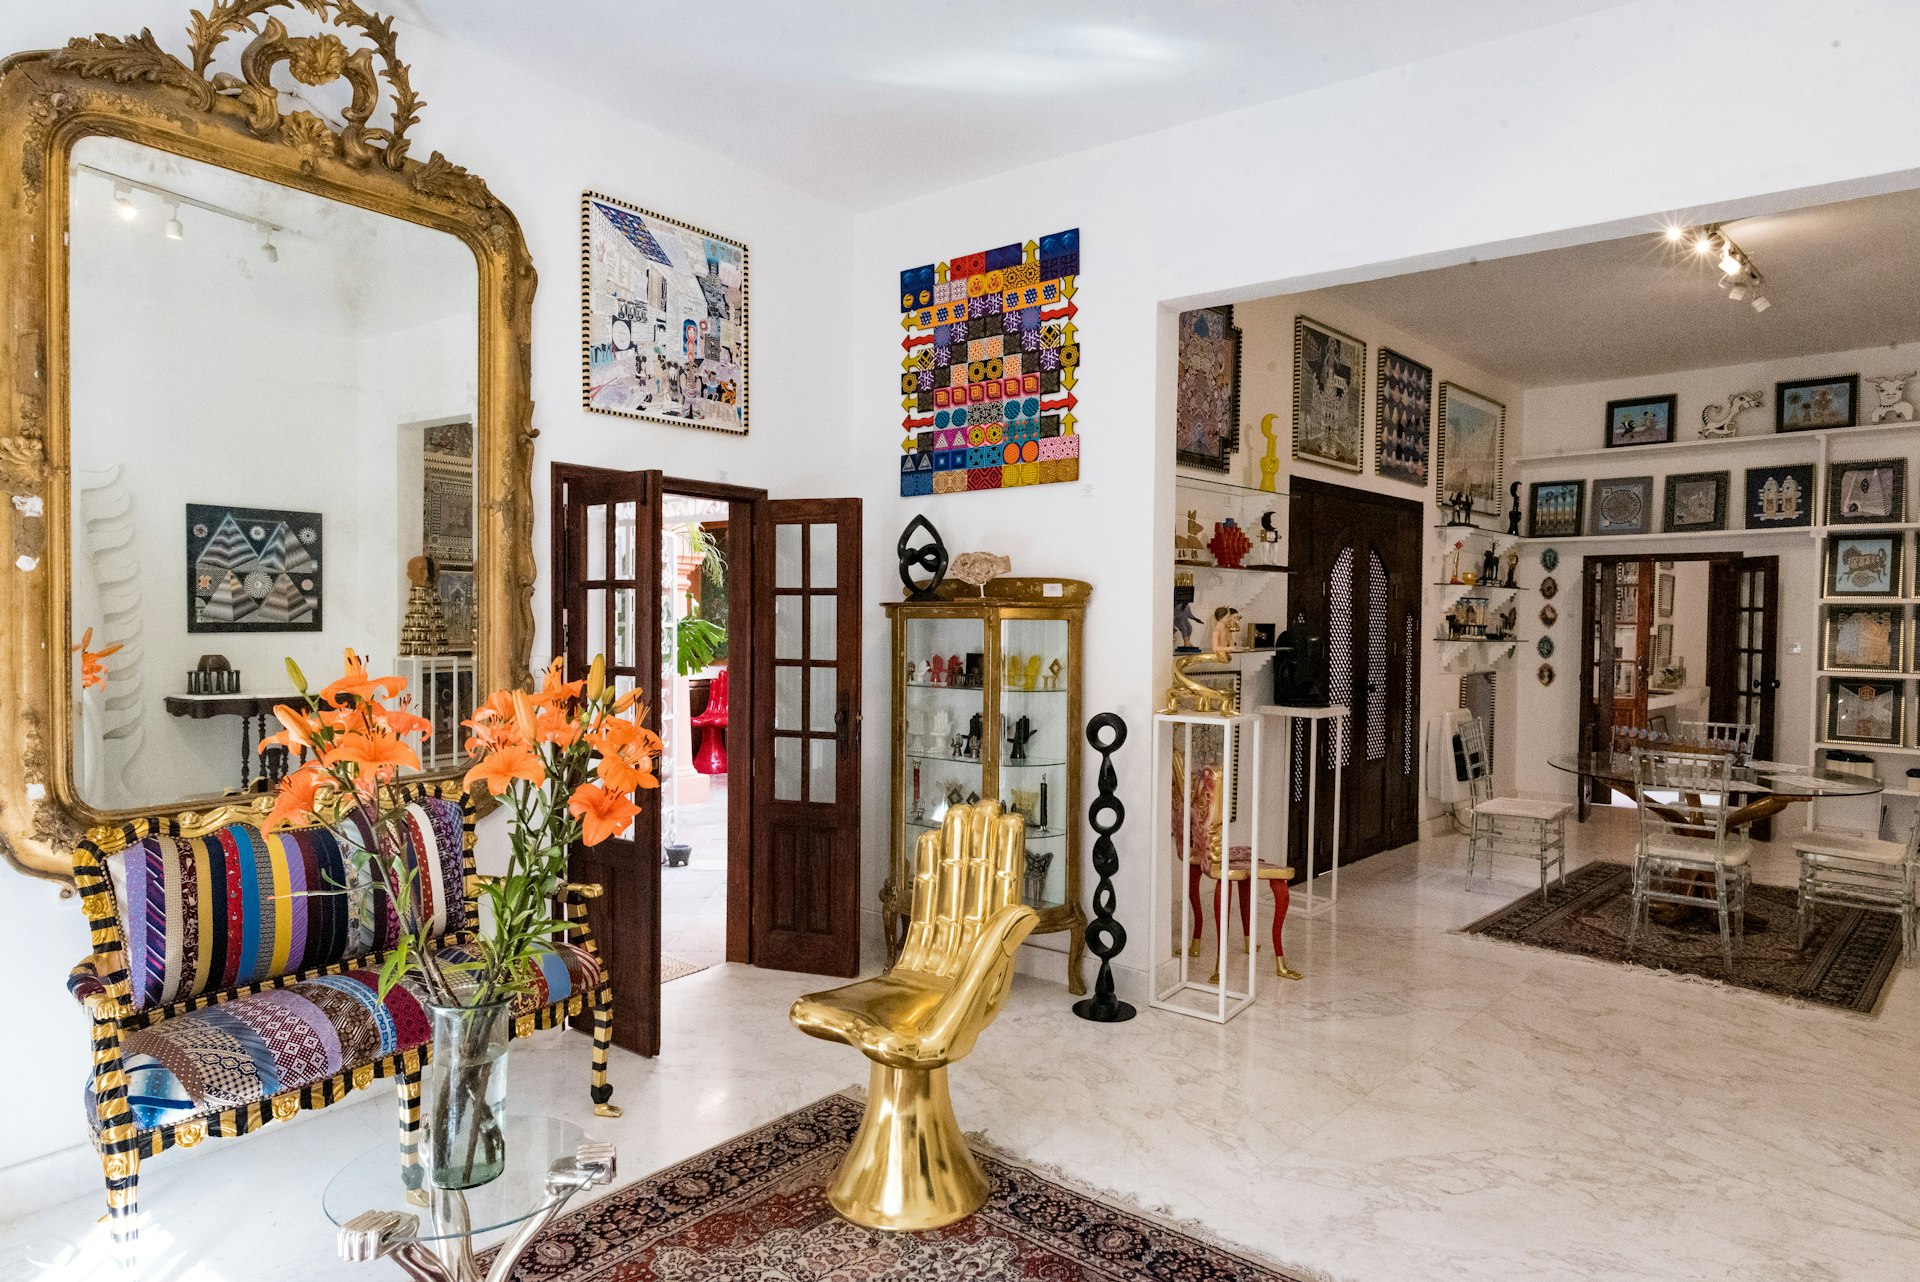 A large brass-frame mirror and a golden chair in the shape of an up-turned hands are the focal points of a large, white-walled design shop. Tasteful rugs, wall hangings and pieces of art are scattered throughout